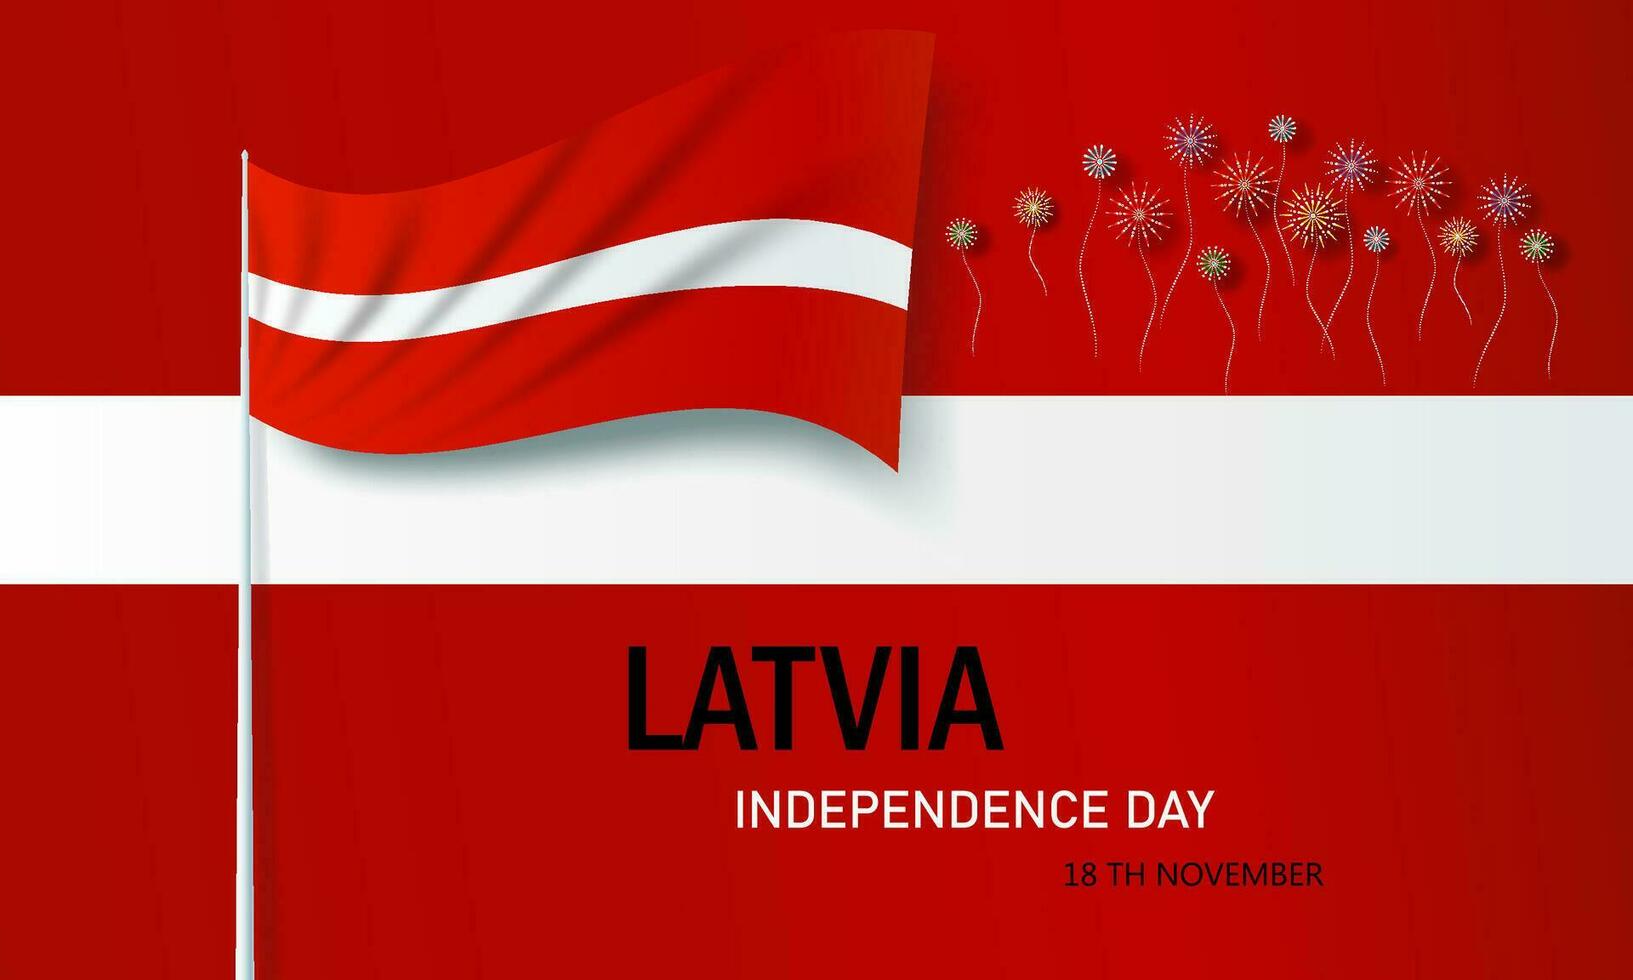 Latvia  national day vector illustration with nation flags.